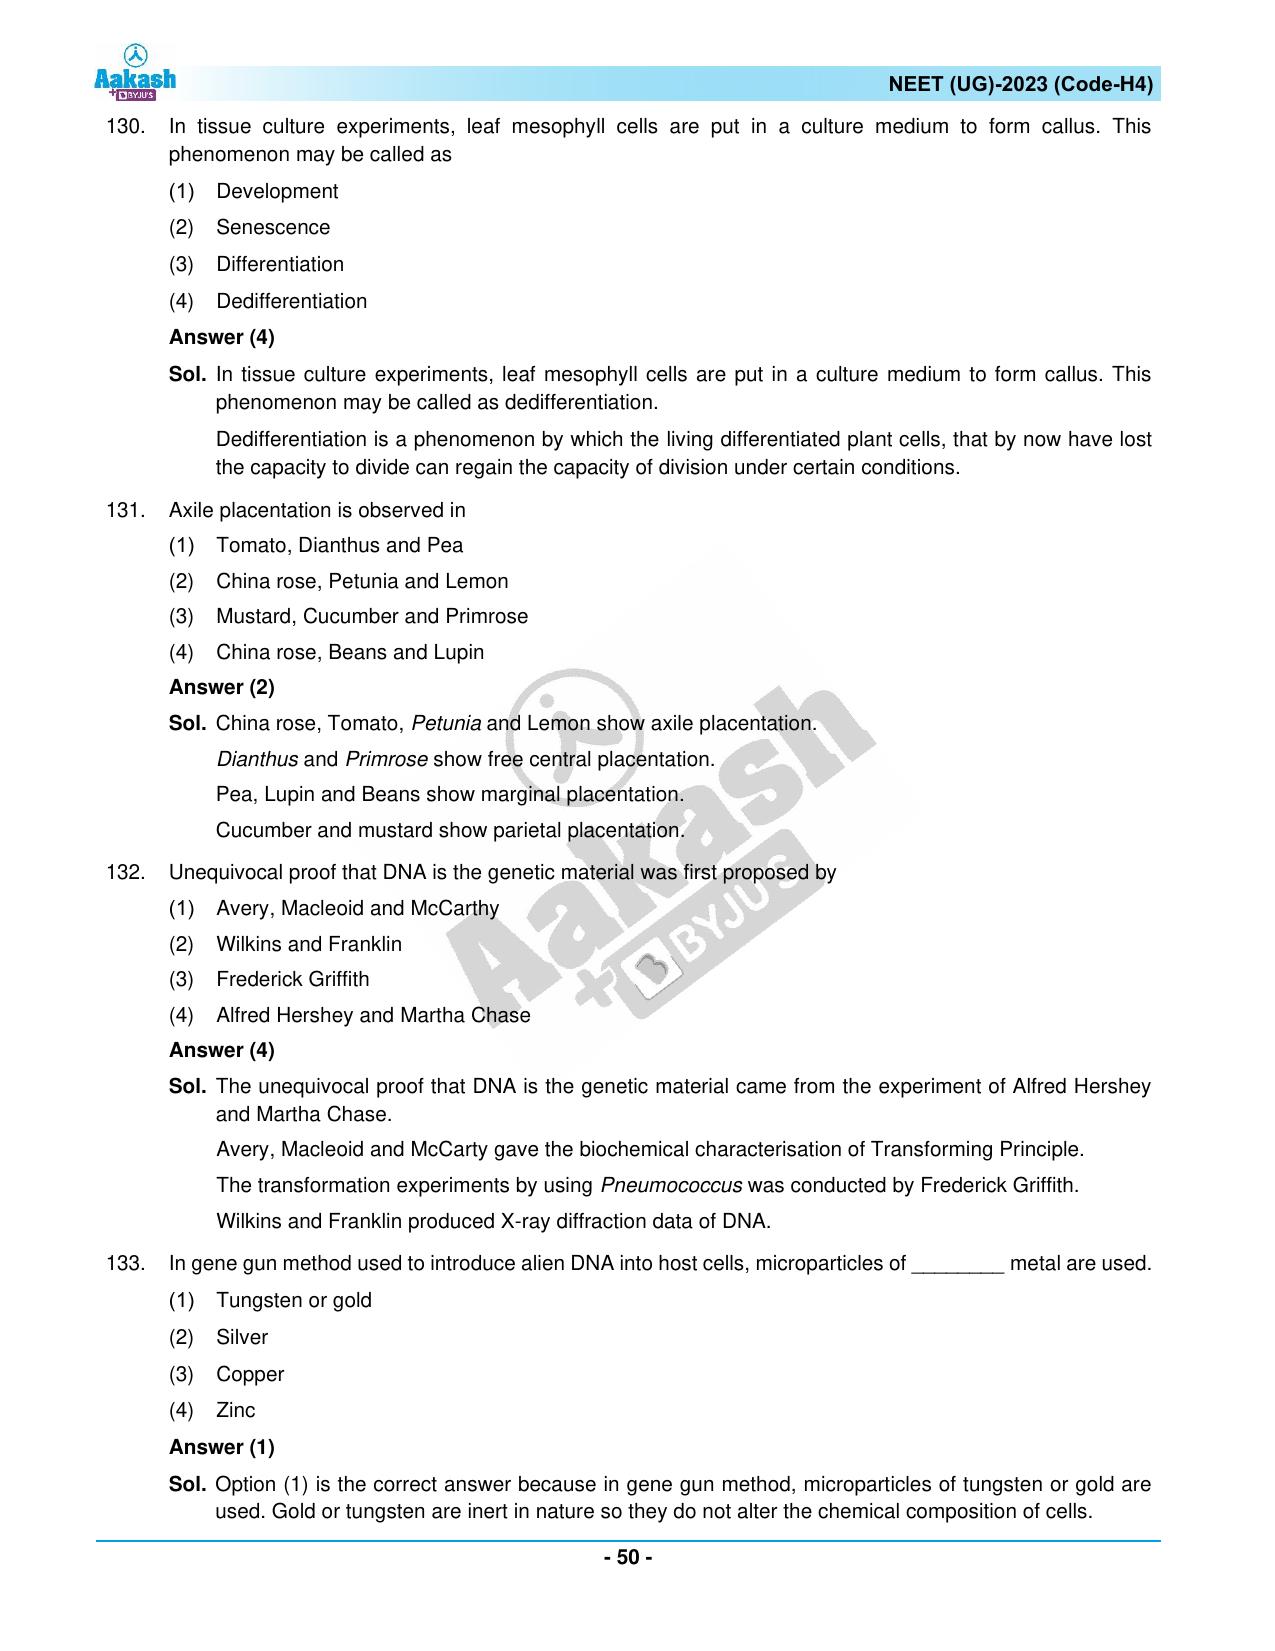 NEET 2023 Question Paper H4 - Page 50